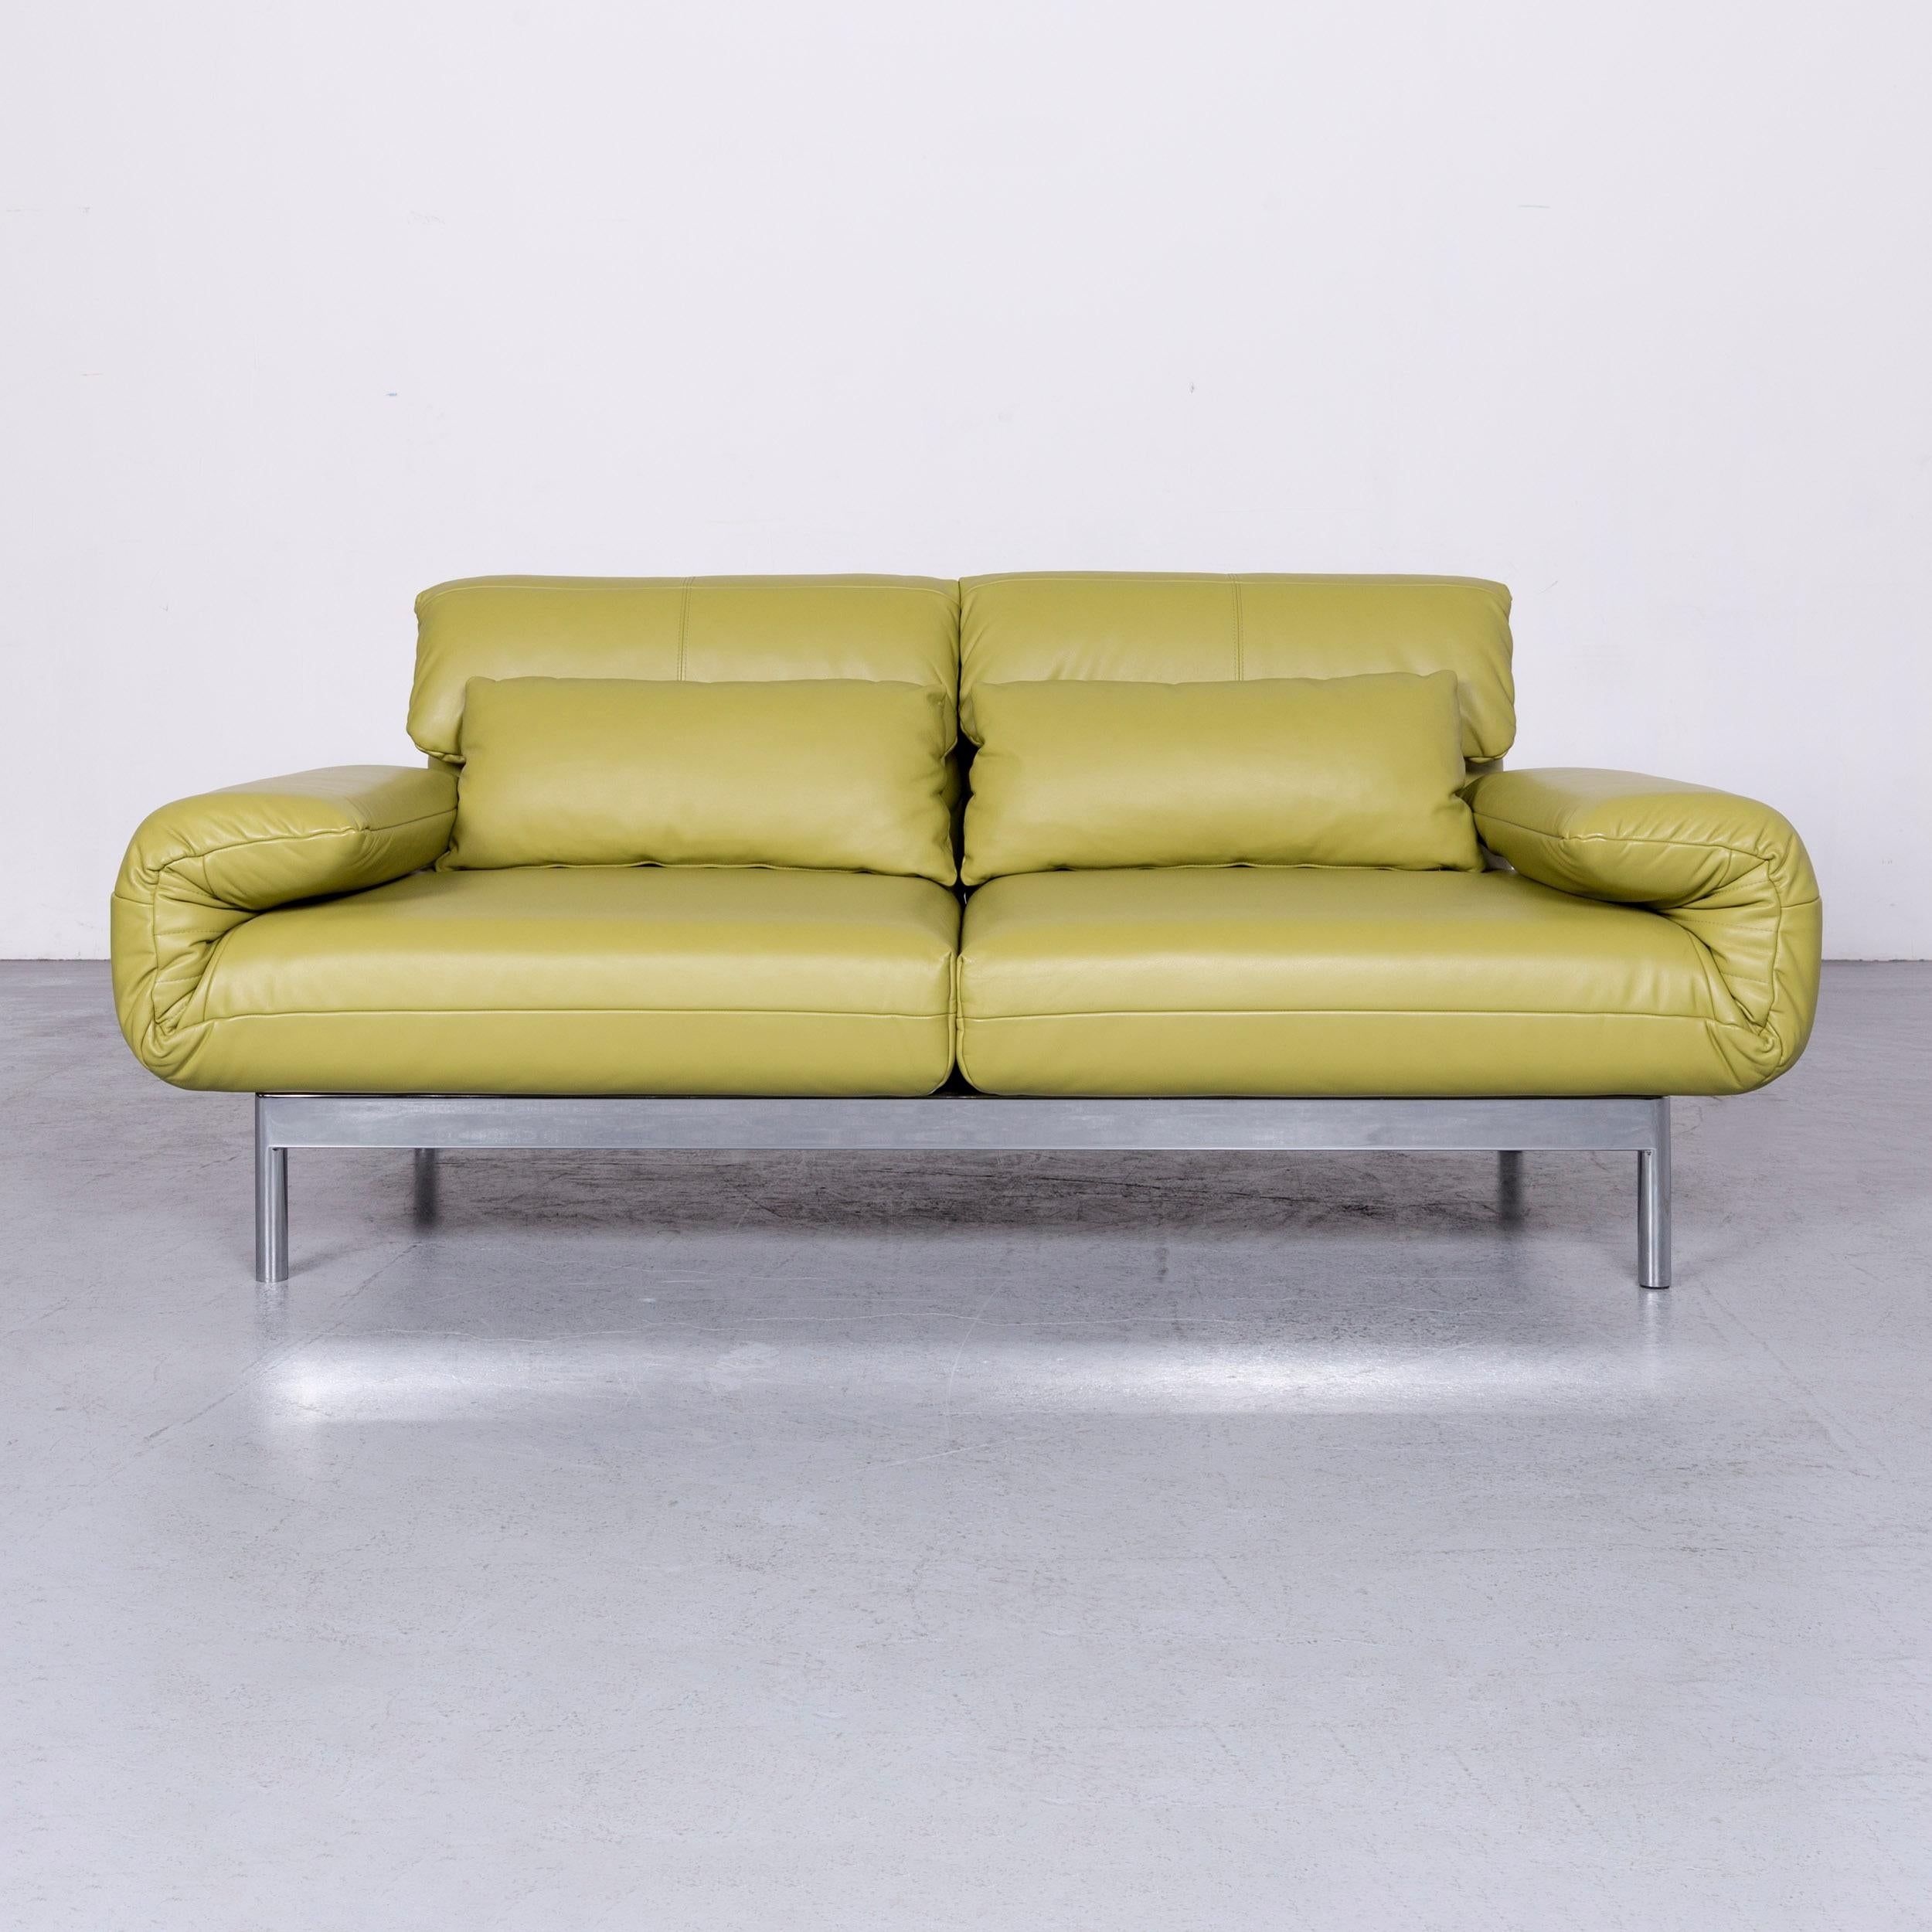 We bring to you a Rolf Benz Plura designer sofa leather green relax function couch modern.